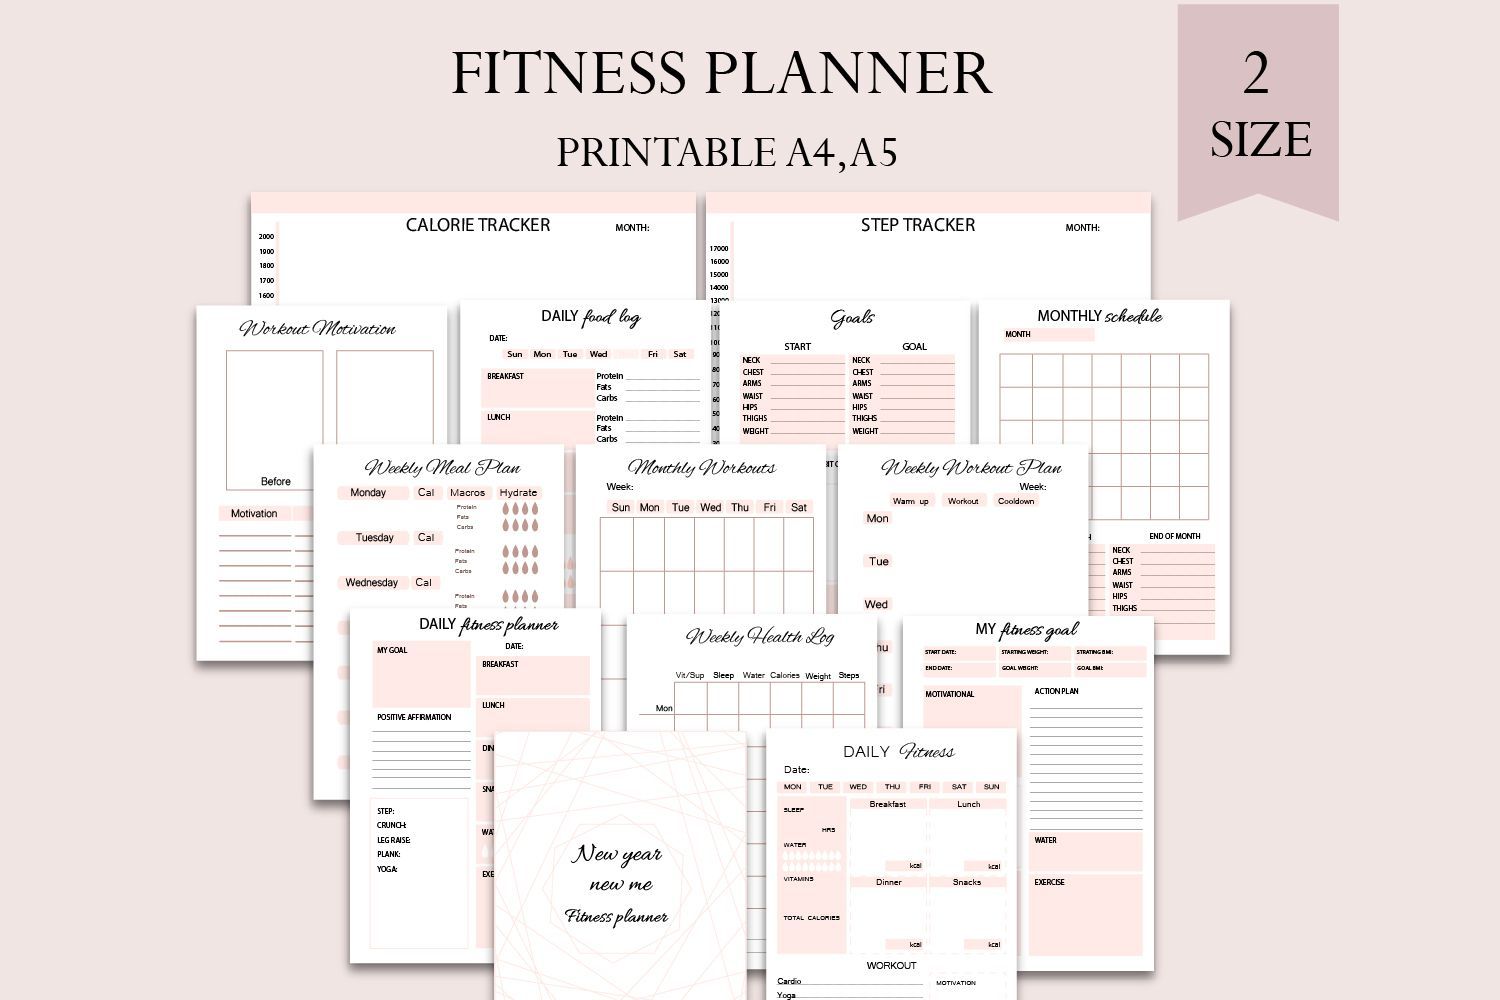 Fitness planner pack, New year new me, - Fitness planner pack, New year new me, -   12 fitness Planner download ideas